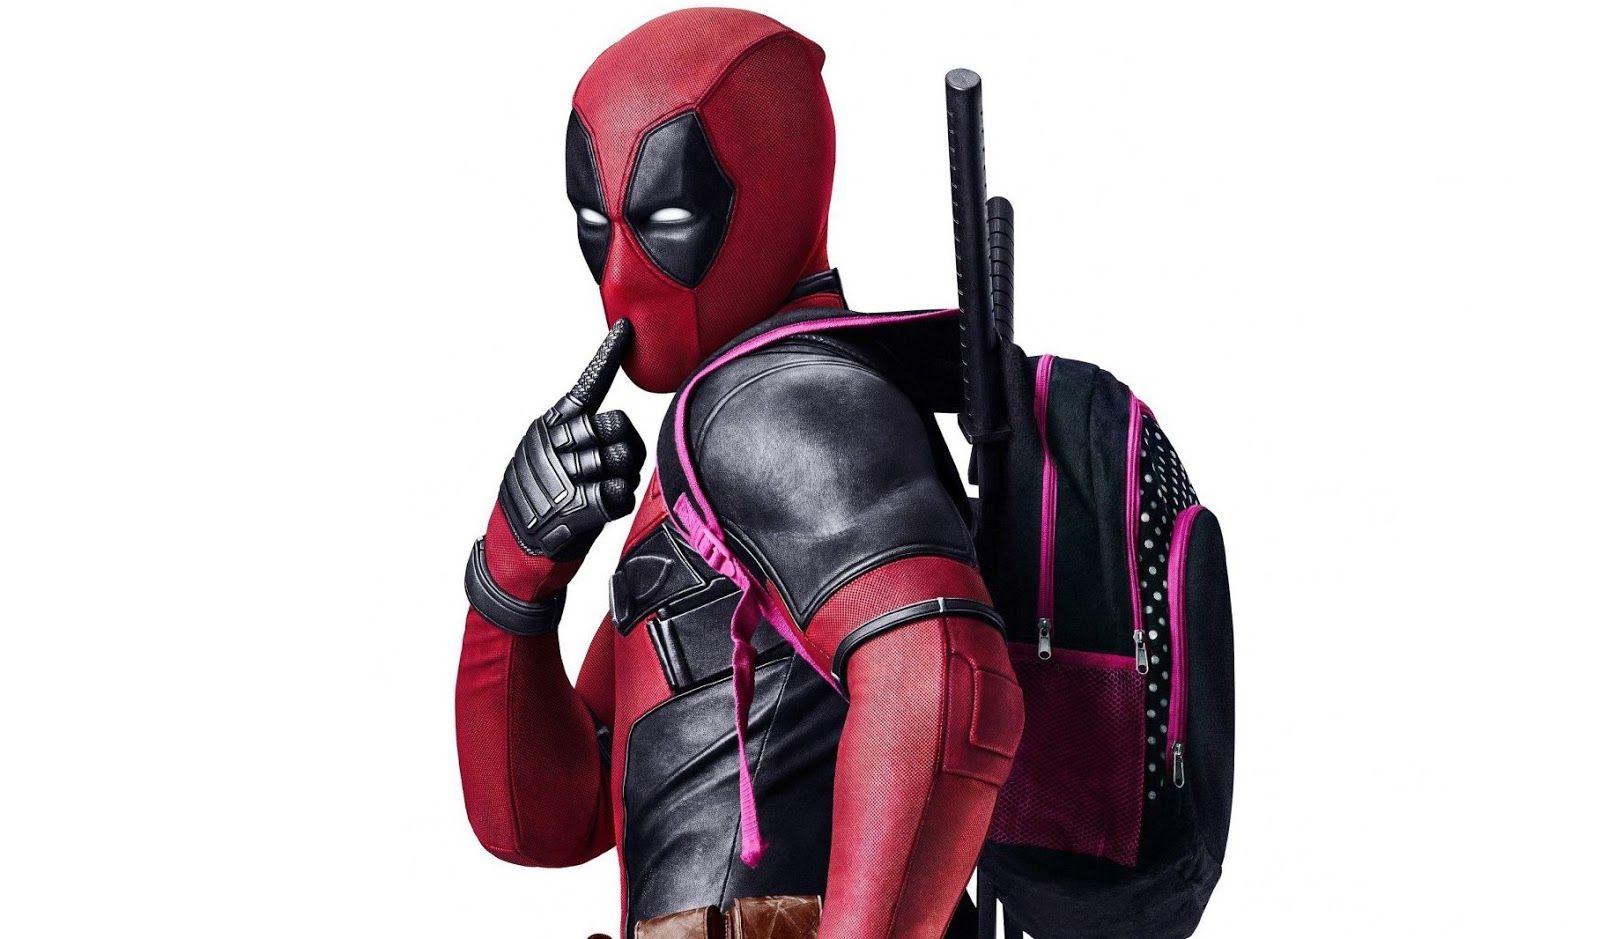 DEADPOOL 2 and NEW MUTANTS to Begin Filming in 2017 and Release in 2018